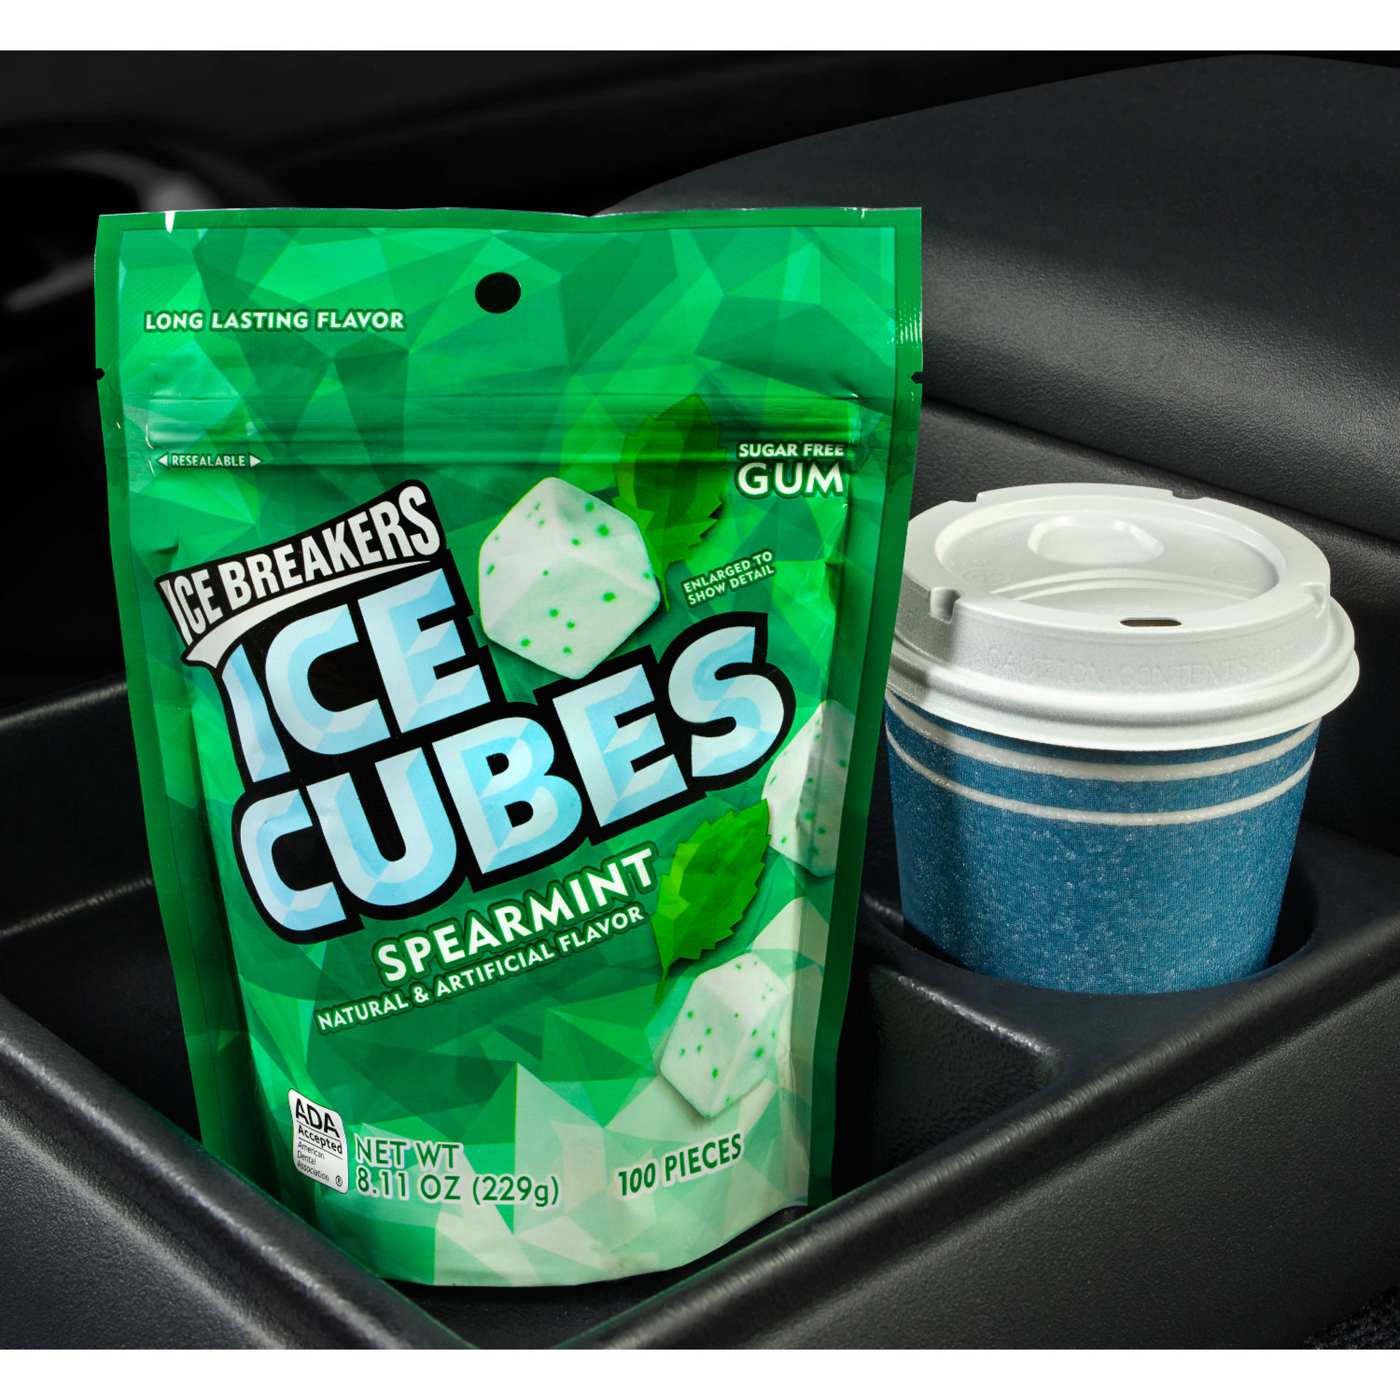 Ice Breakers Ice Cubes Sugar Free Chewing Gum Pouch - Spearmint; image 3 of 4